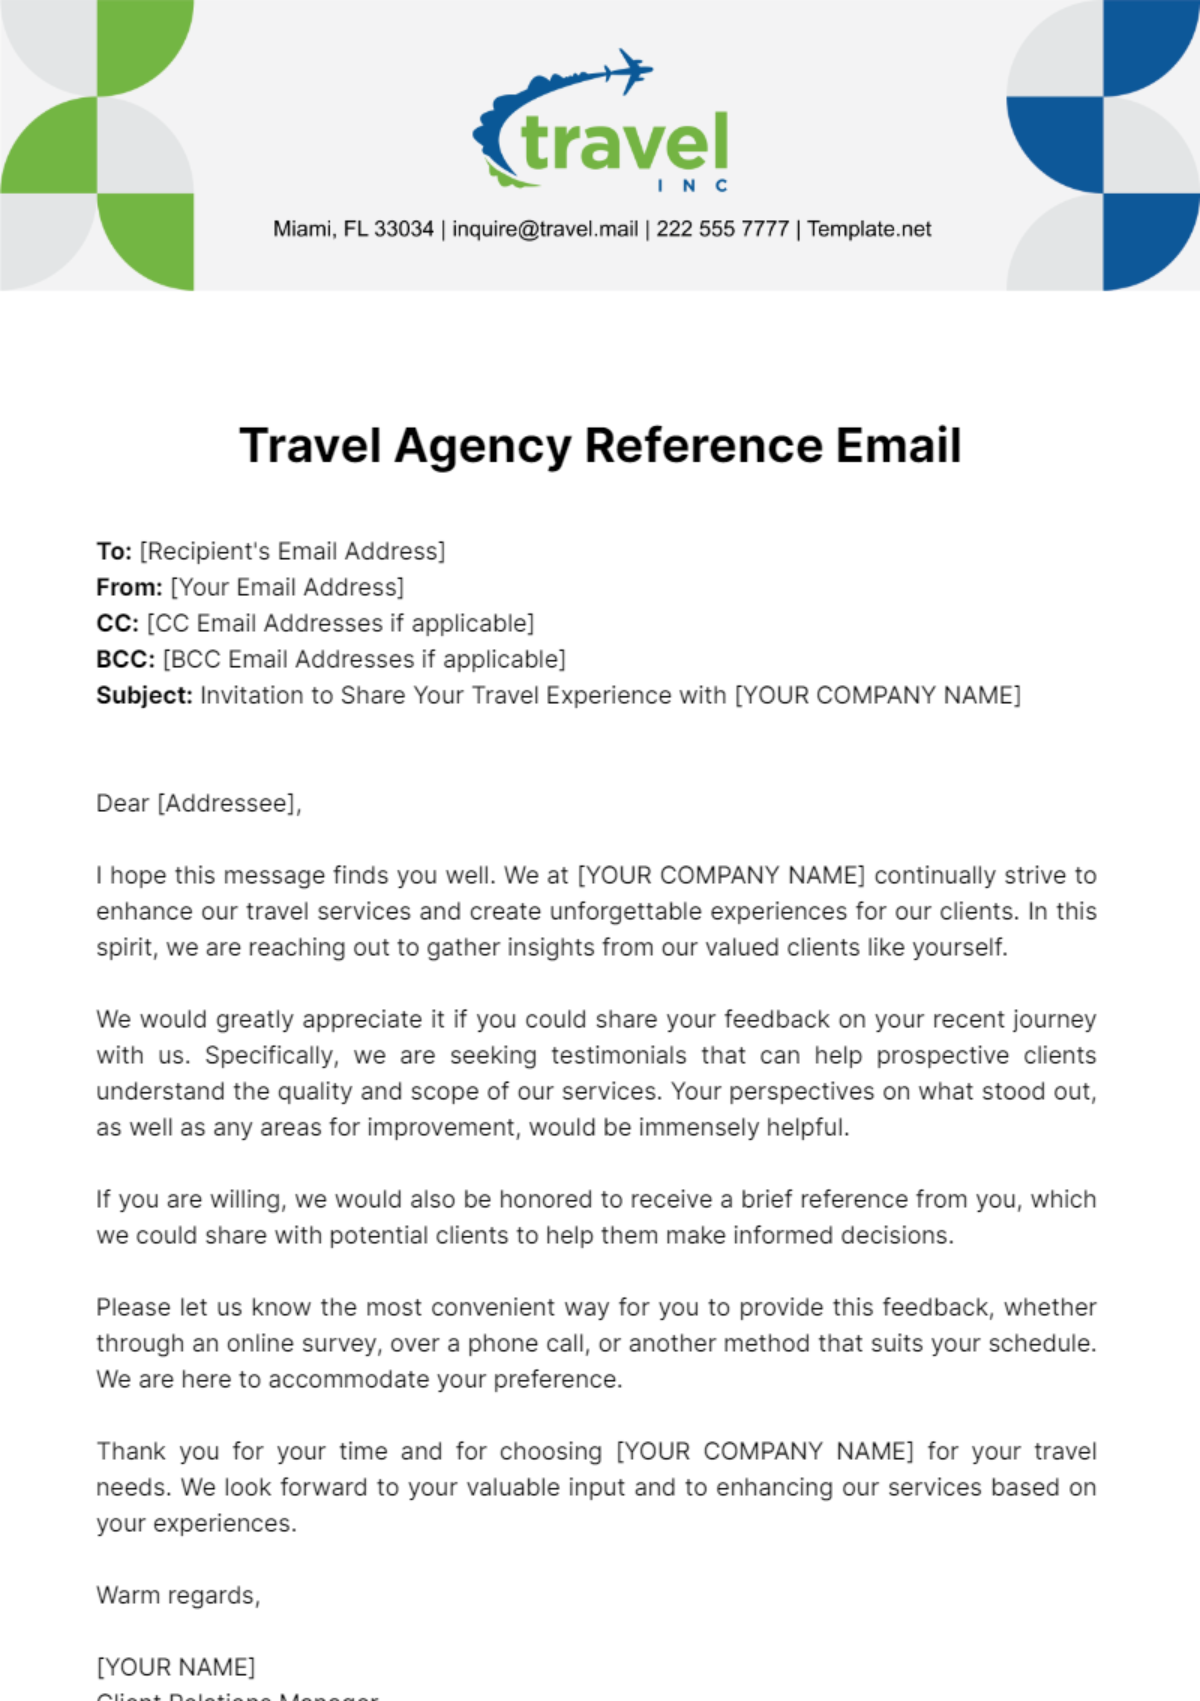 Travel Agency Reference Email Template